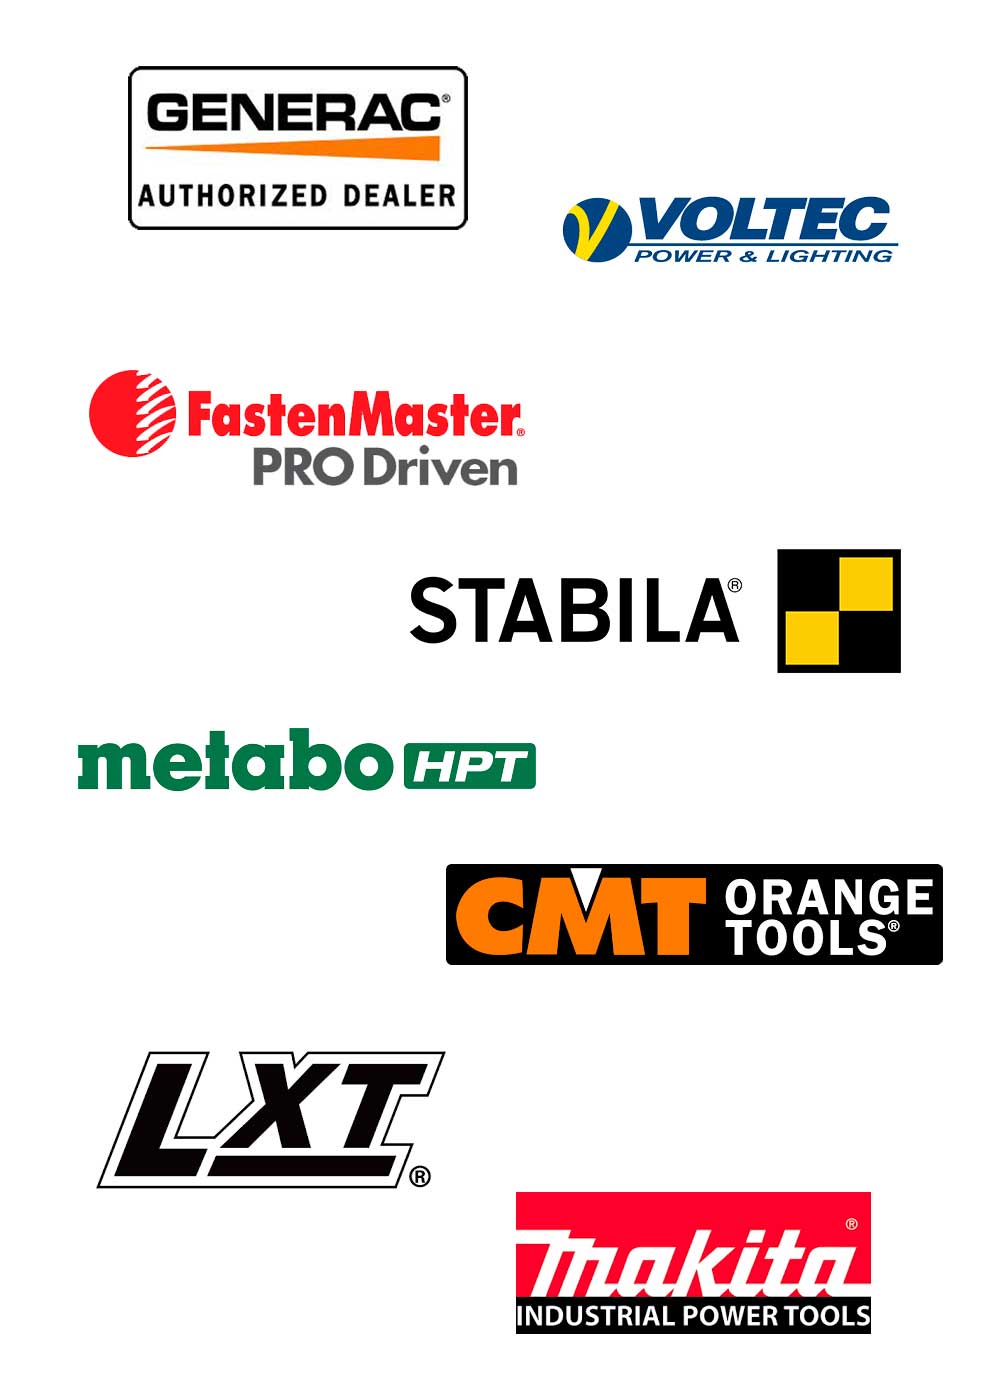 Various logos on a white background - Generac, Voltec, FastenMaster, Stabila, Metabo HPT, CMT Orange Tools, LXT, Makita Industrial Power Tools.